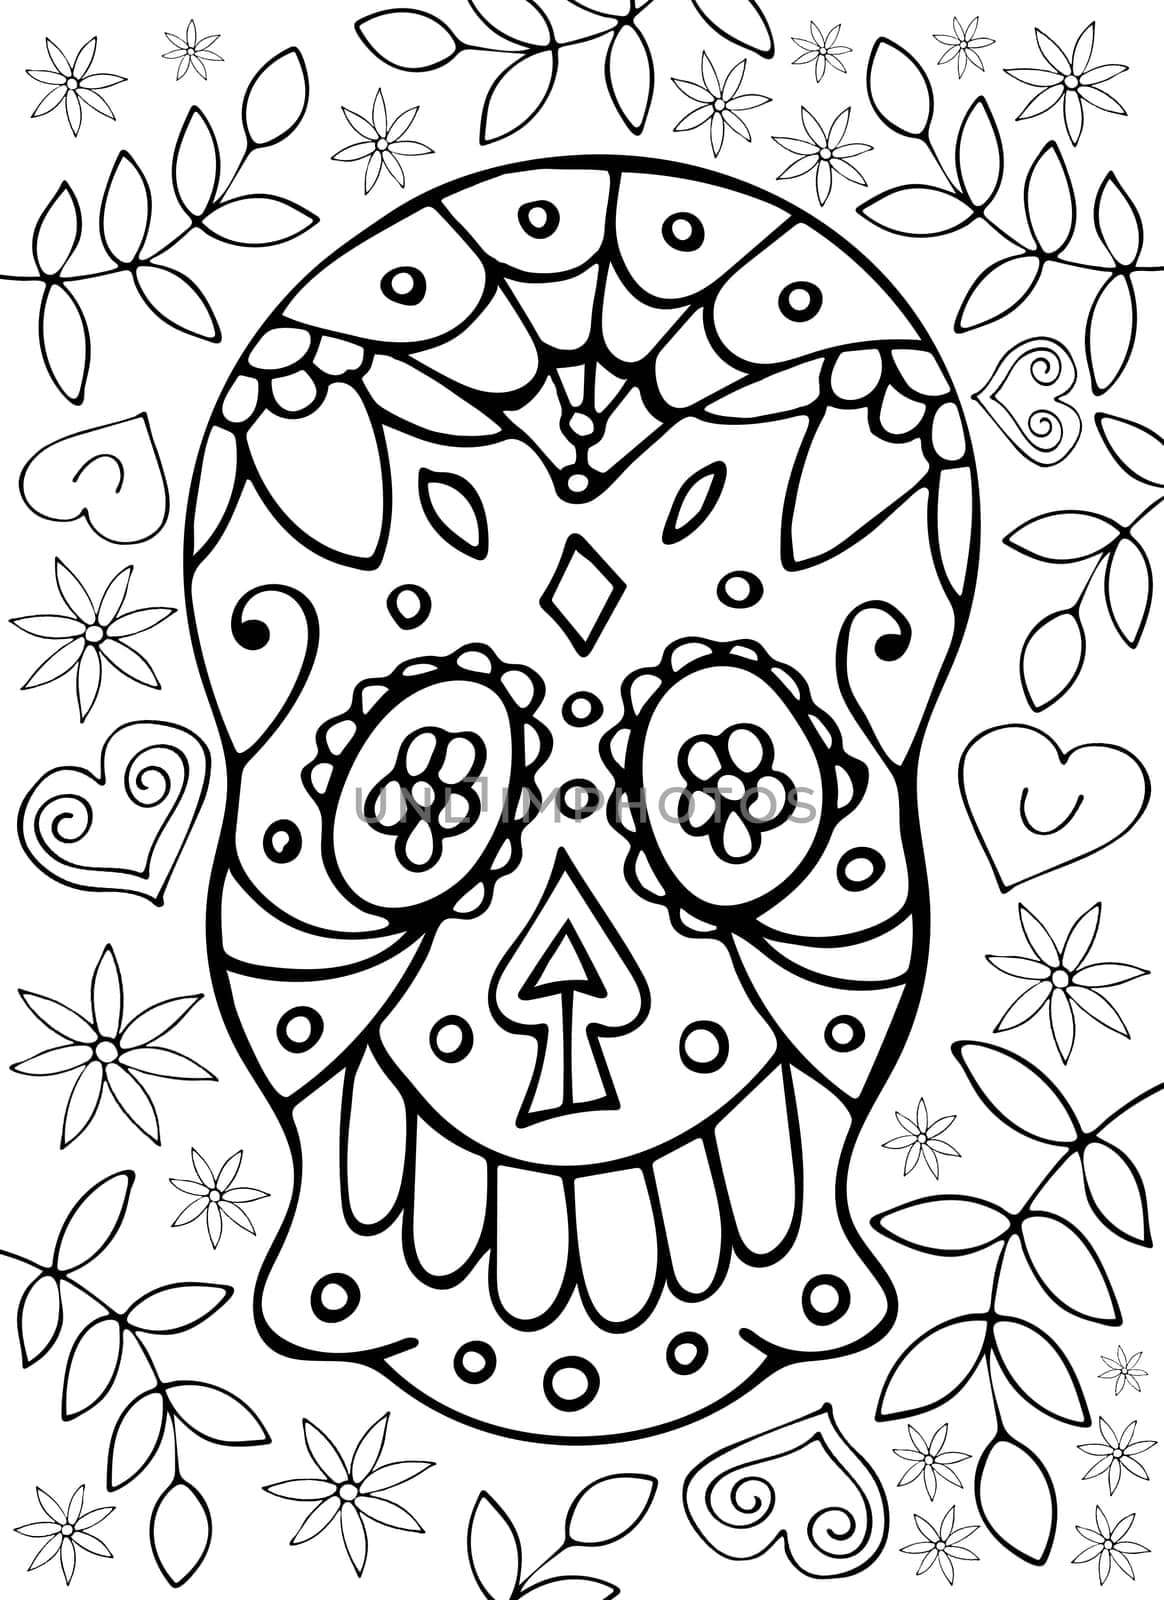 Sugar Skull Head with a Traditional Mexican Mural to Celebrate the Day of Dead. Black and White Anti Stress Paint for Coloring Book, Page and Sheet. Dia de los Muertos Holiday.